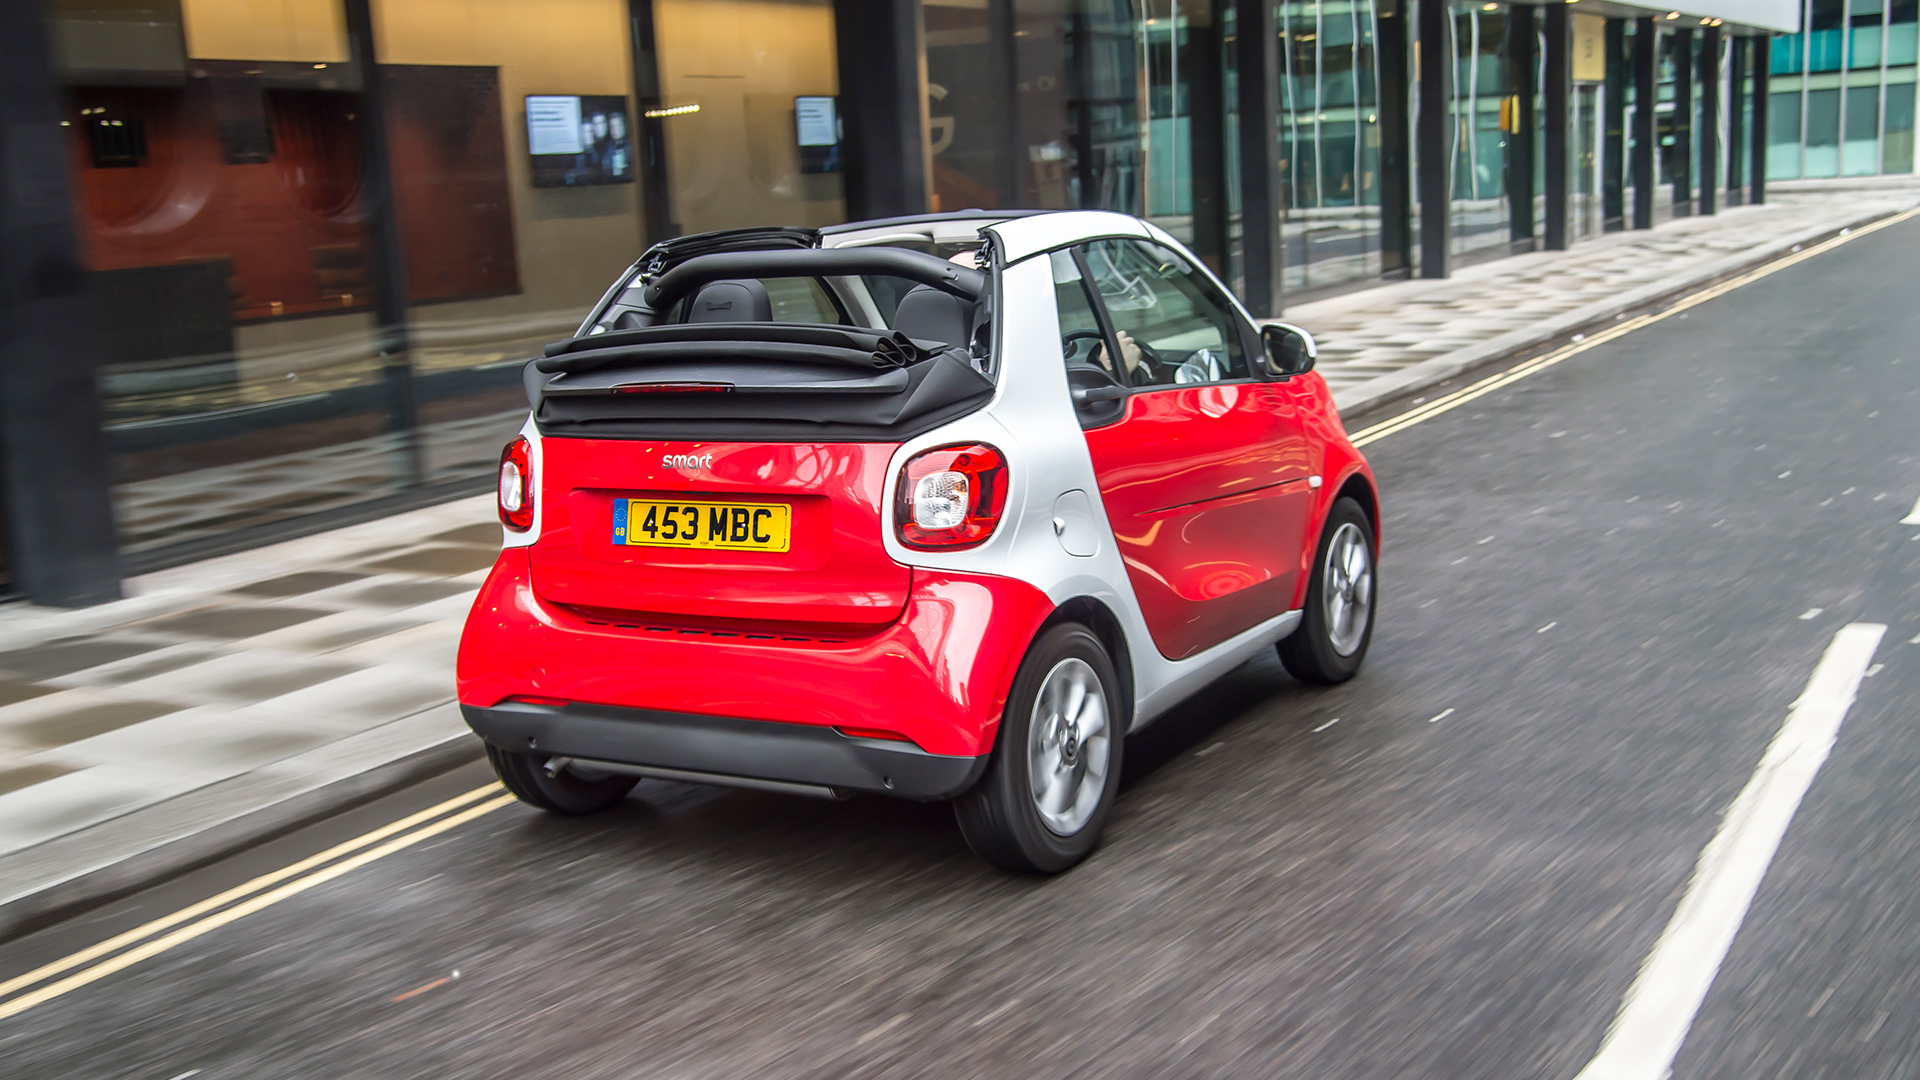 Smart fortwo Convertible Cars For Sale | AutoTrader UK